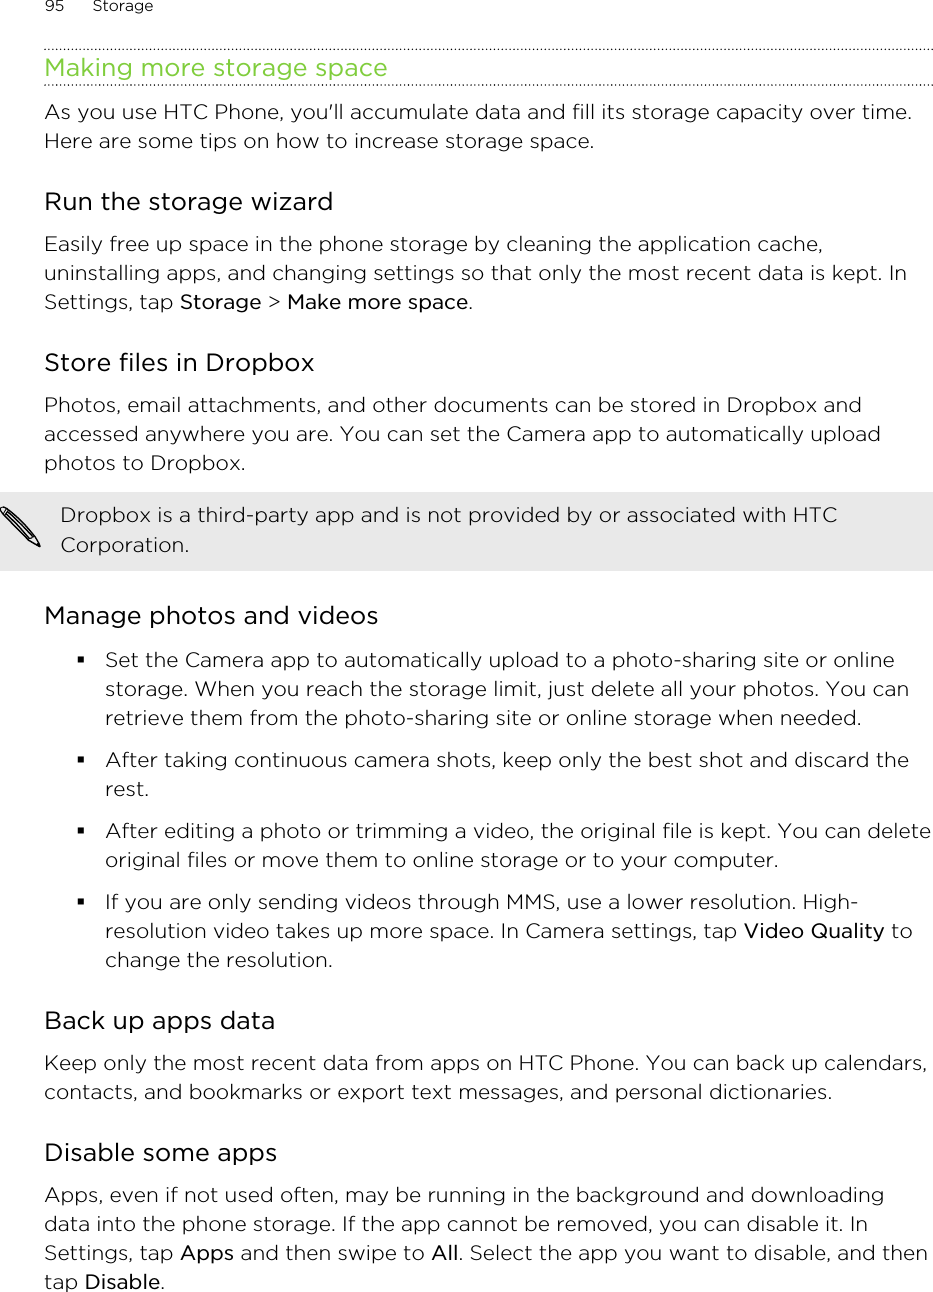 Making more storage spaceAs you use HTC Phone, you&apos;ll accumulate data and fill its storage capacity over time.Here are some tips on how to increase storage space.Run the storage wizardEasily free up space in the phone storage by cleaning the application cache,uninstalling apps, and changing settings so that only the most recent data is kept. InSettings, tap Storage &gt; Make more space.Store files in DropboxPhotos, email attachments, and other documents can be stored in Dropbox andaccessed anywhere you are. You can set the Camera app to automatically uploadphotos to Dropbox.Dropbox is a third-party app and is not provided by or associated with HTCCorporation.Manage photos and videos§Set the Camera app to automatically upload to a photo-sharing site or onlinestorage. When you reach the storage limit, just delete all your photos. You canretrieve them from the photo-sharing site or online storage when needed.§After taking continuous camera shots, keep only the best shot and discard therest.§After editing a photo or trimming a video, the original file is kept. You can deleteoriginal files or move them to online storage or to your computer.§If you are only sending videos through MMS, use a lower resolution. High-resolution video takes up more space. In Camera settings, tap Video Quality tochange the resolution.Back up apps dataKeep only the most recent data from apps on HTC Phone. You can back up calendars,contacts, and bookmarks or export text messages, and personal dictionaries.Disable some appsApps, even if not used often, may be running in the background and downloadingdata into the phone storage. If the app cannot be removed, you can disable it. InSettings, tap Apps and then swipe to All. Select the app you want to disable, and thentap Disable.95 Storage